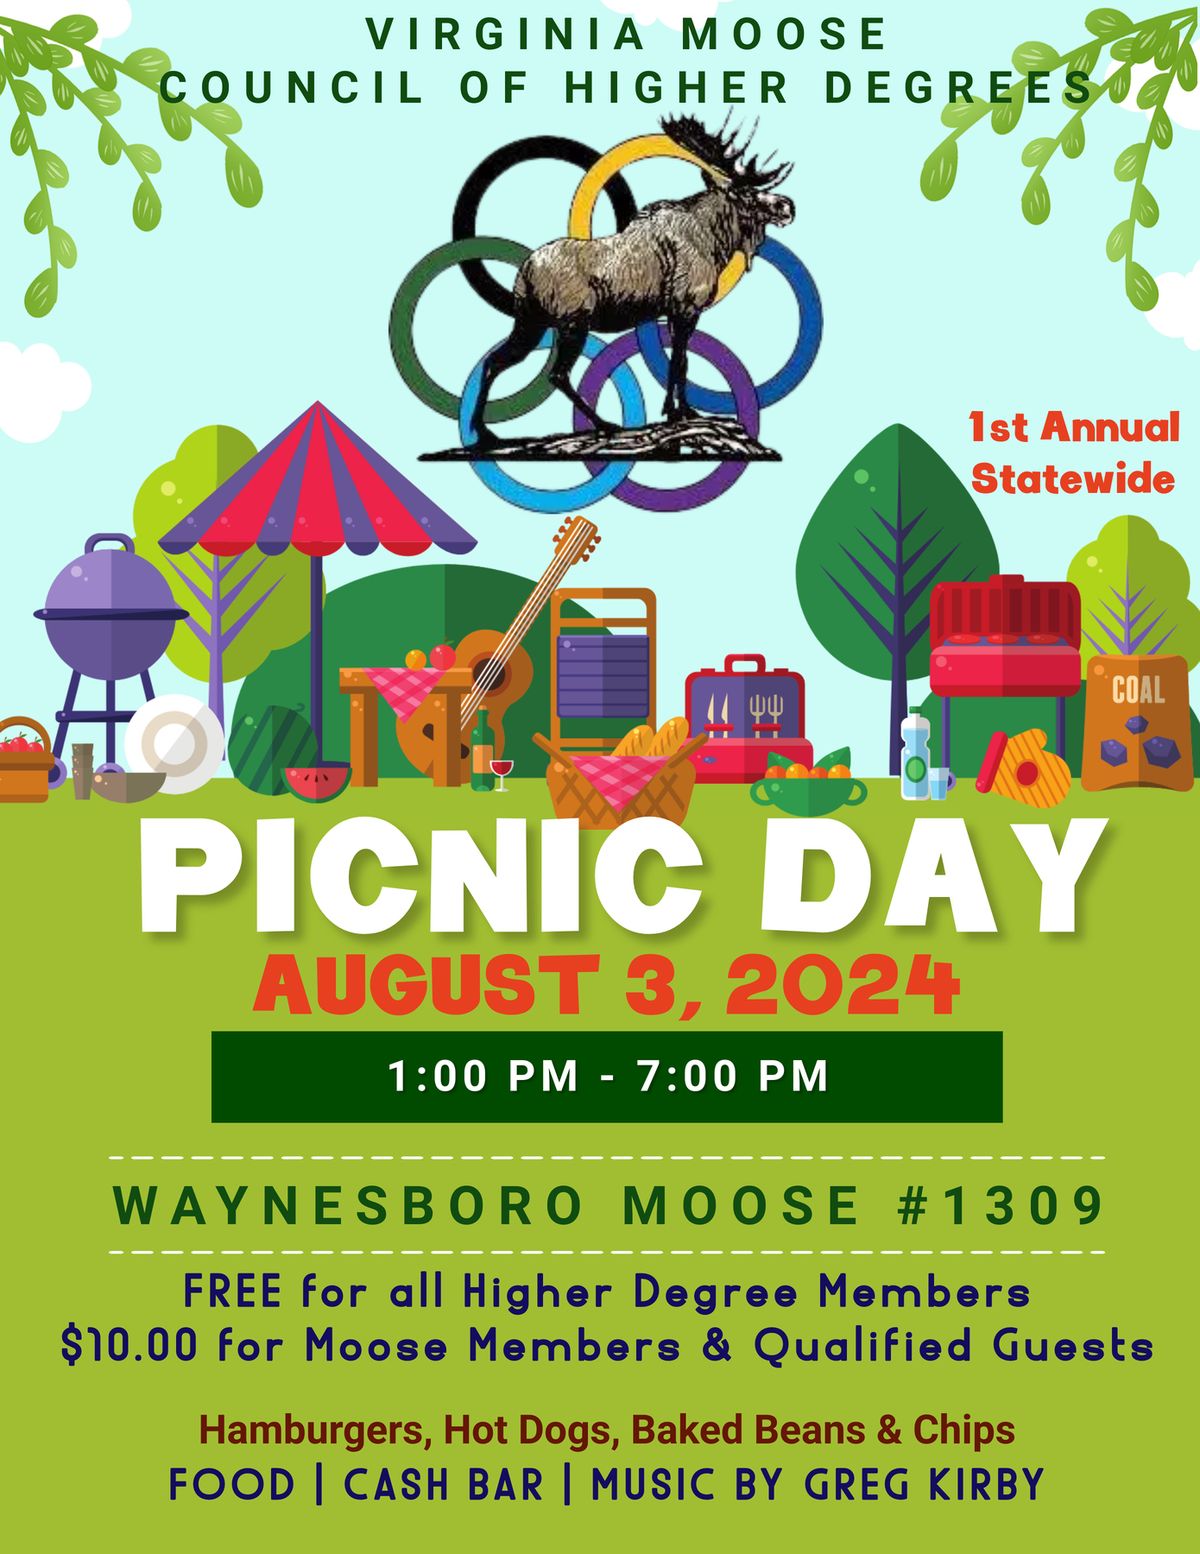 Council of Higher Degrees PICNIC DAY -1st Annual Statewide